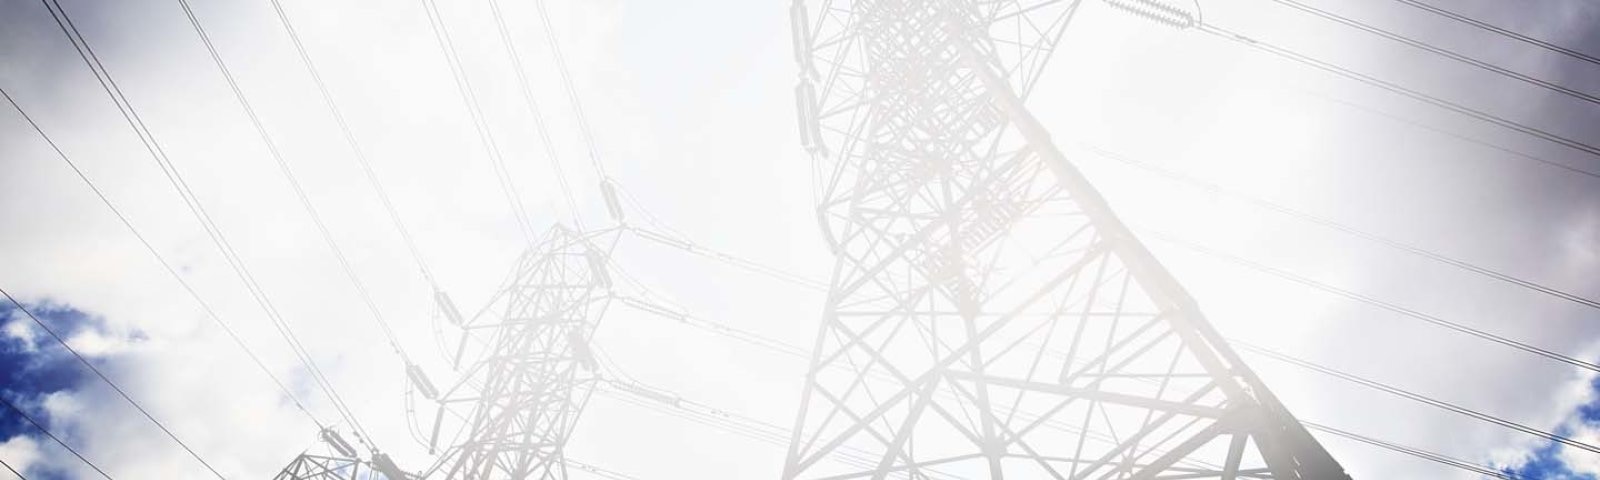 Customer solutions for utilities